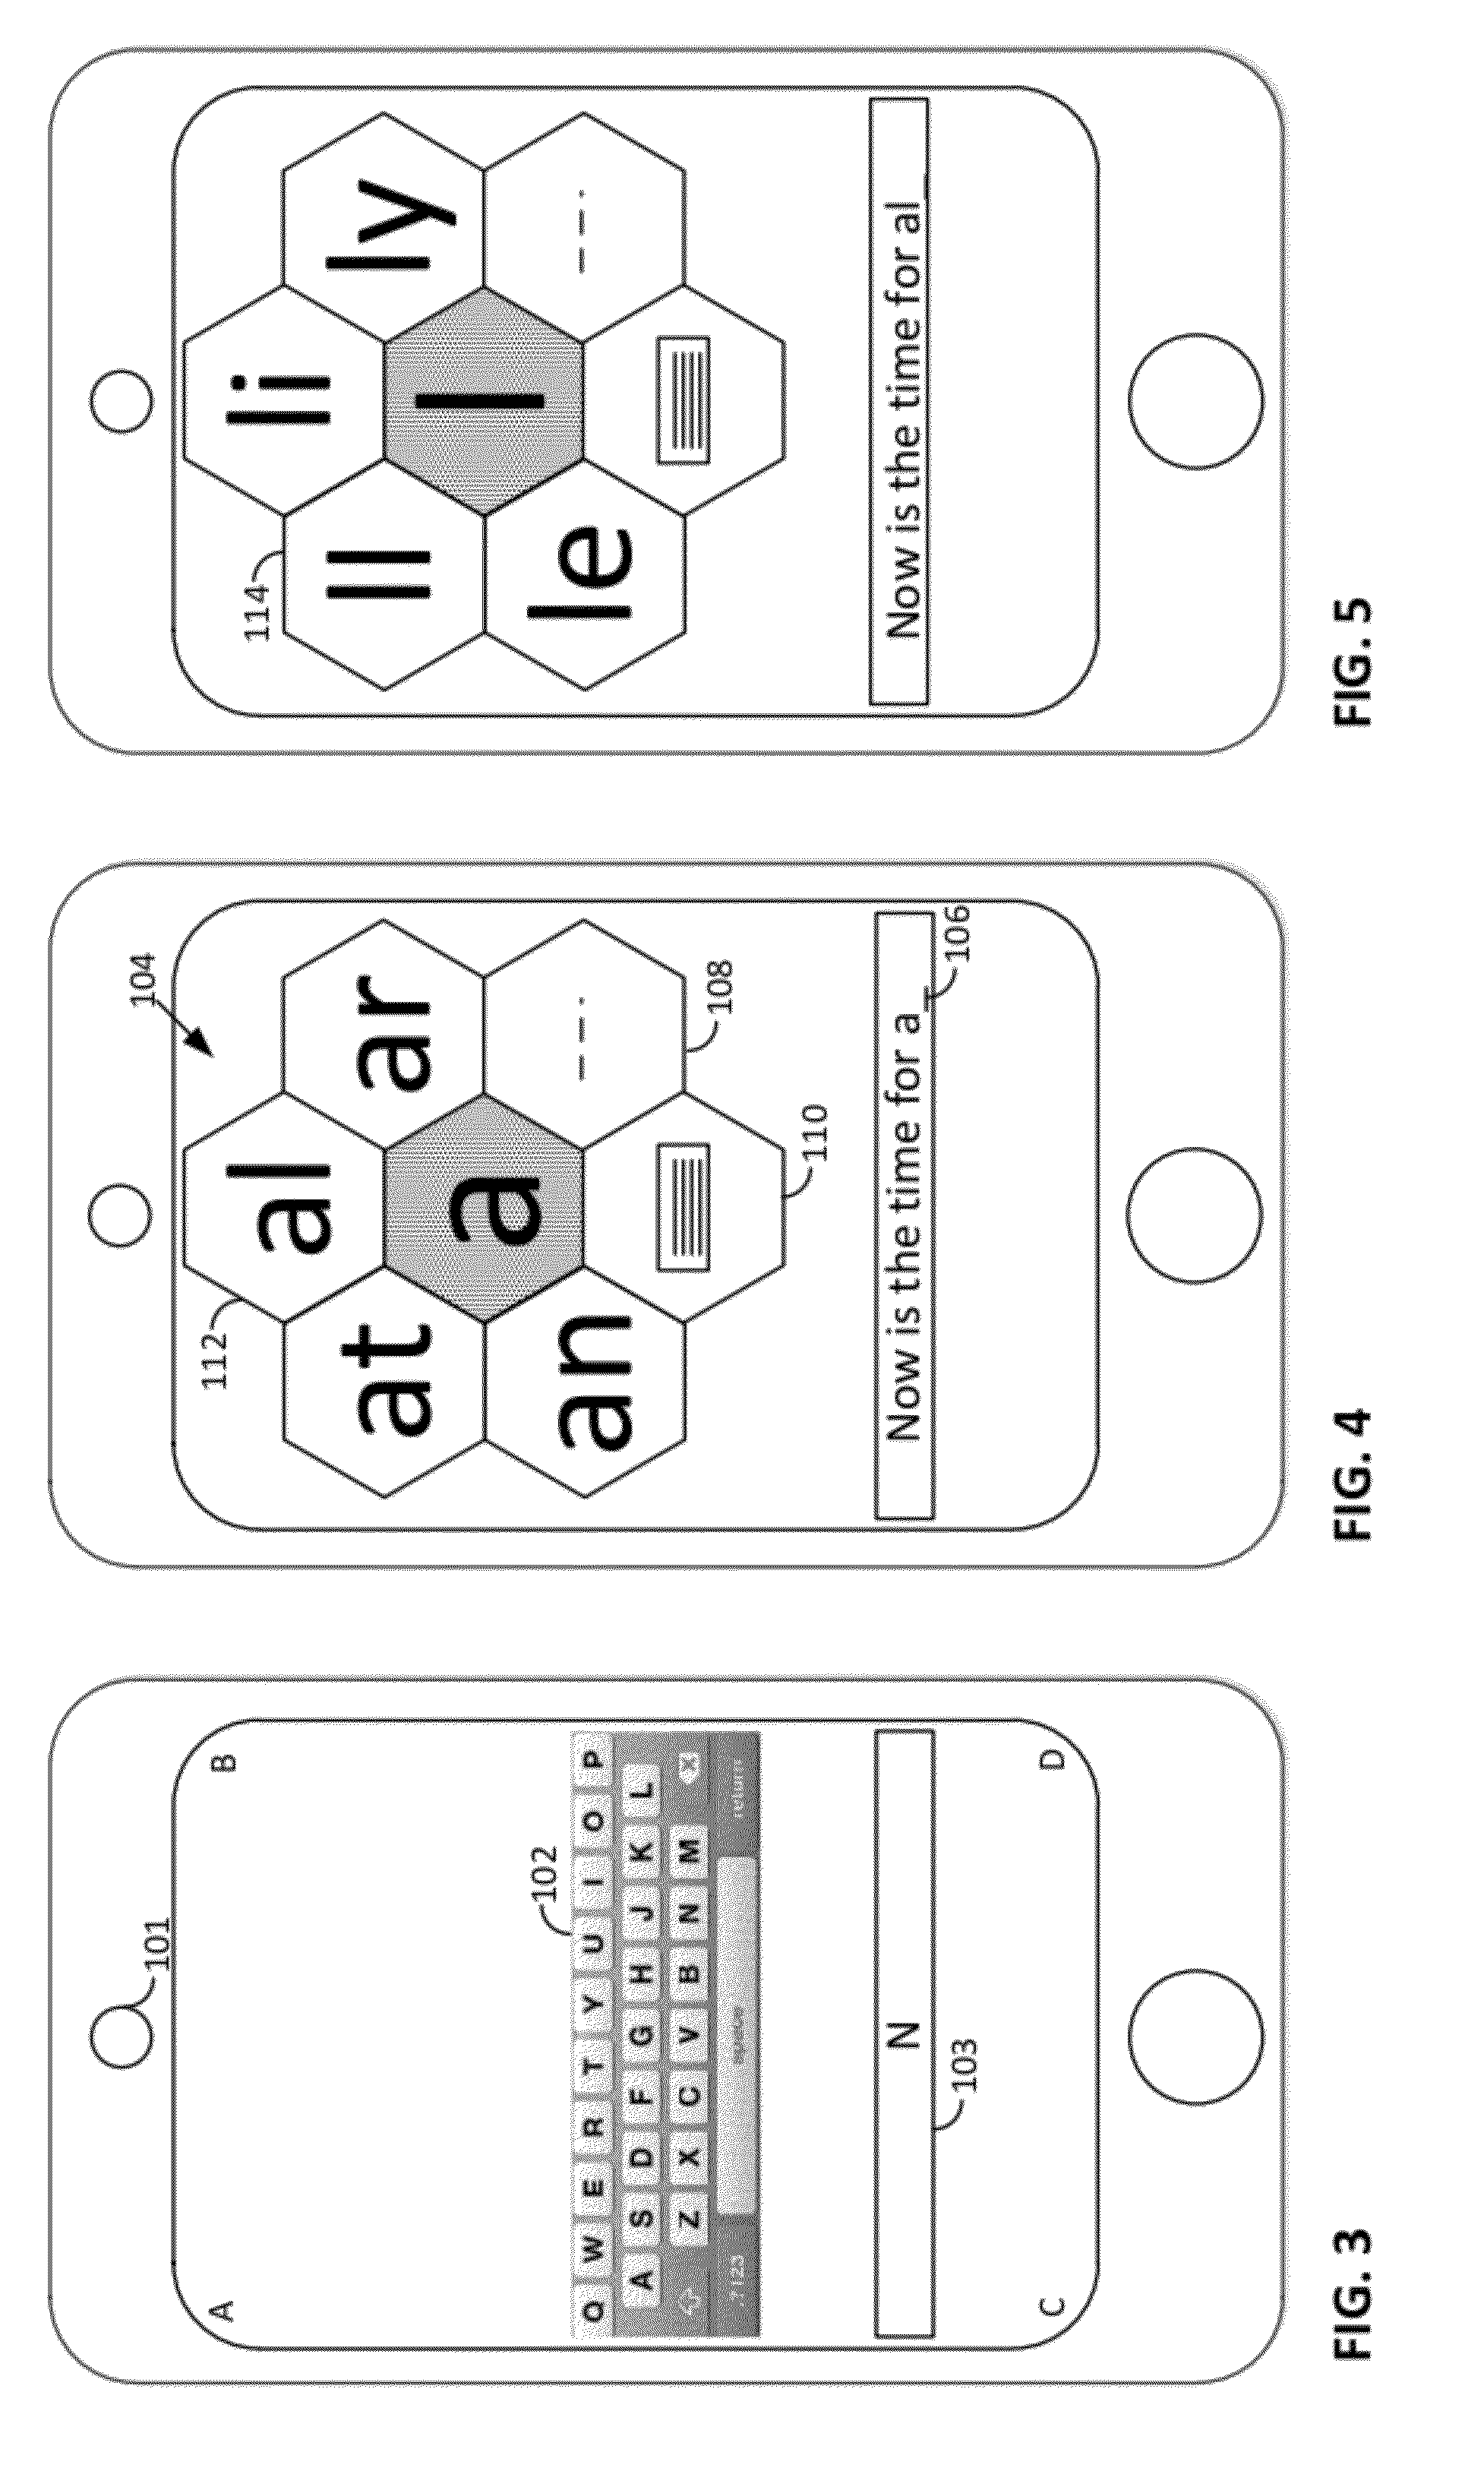 Smartphone-based methods and systems